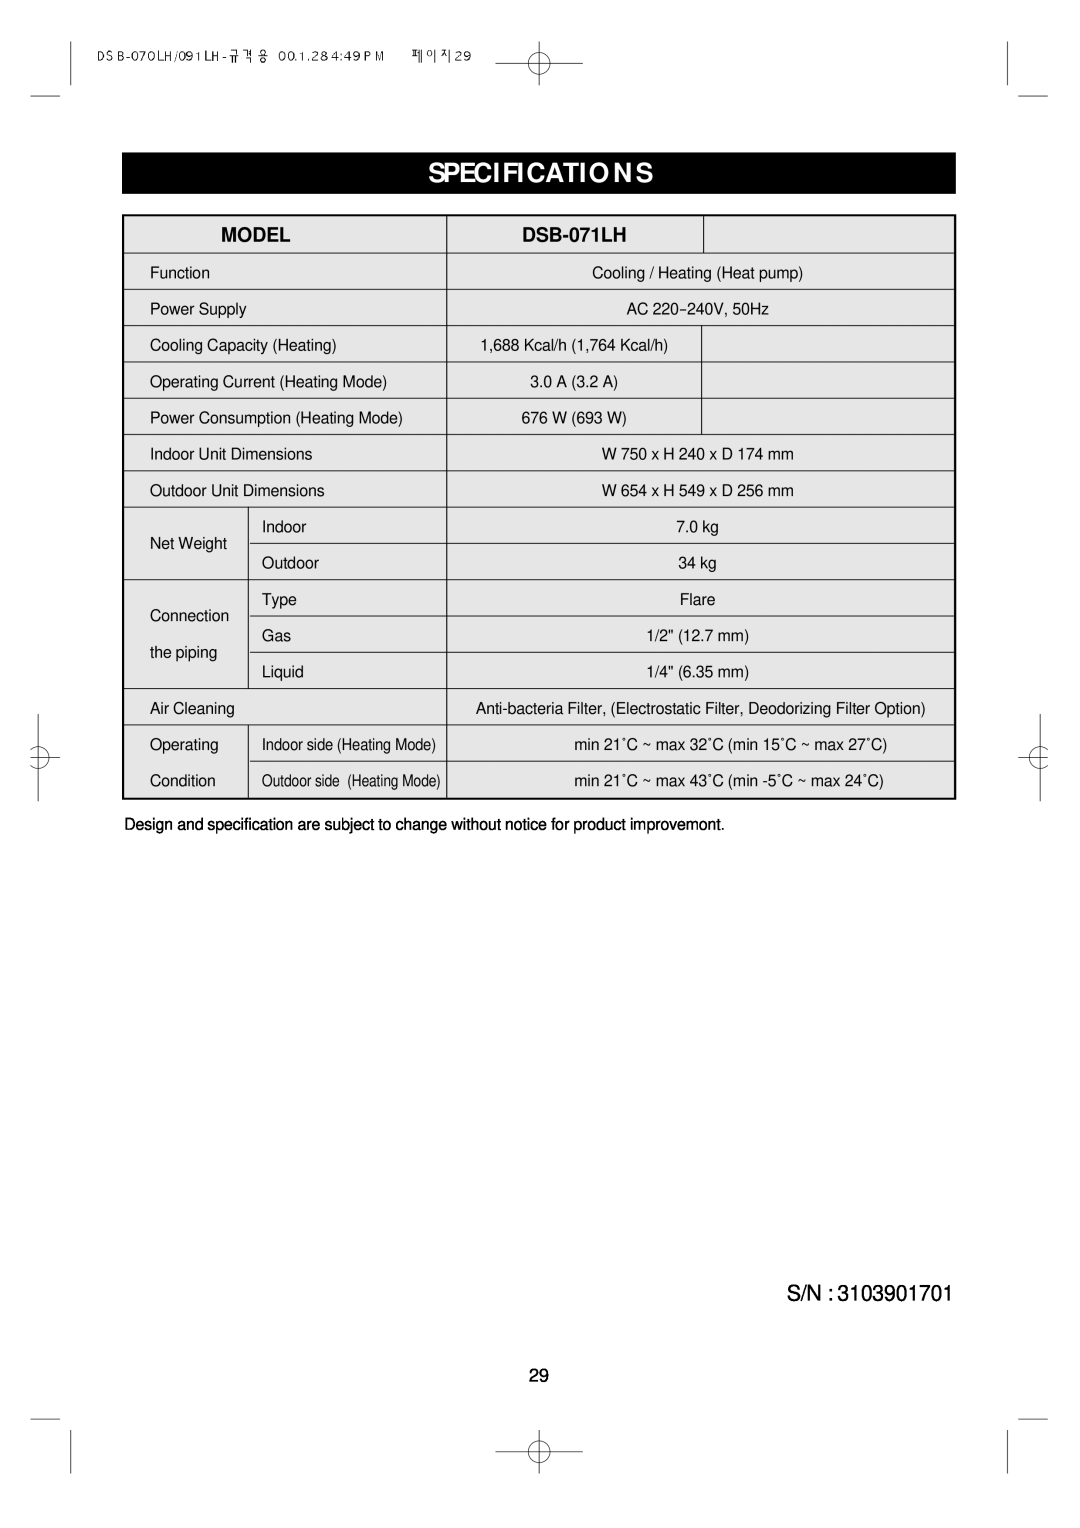 Daewoo DSB-071LH, Split Airconditioning System owner manual Specifications, Model, S/N 